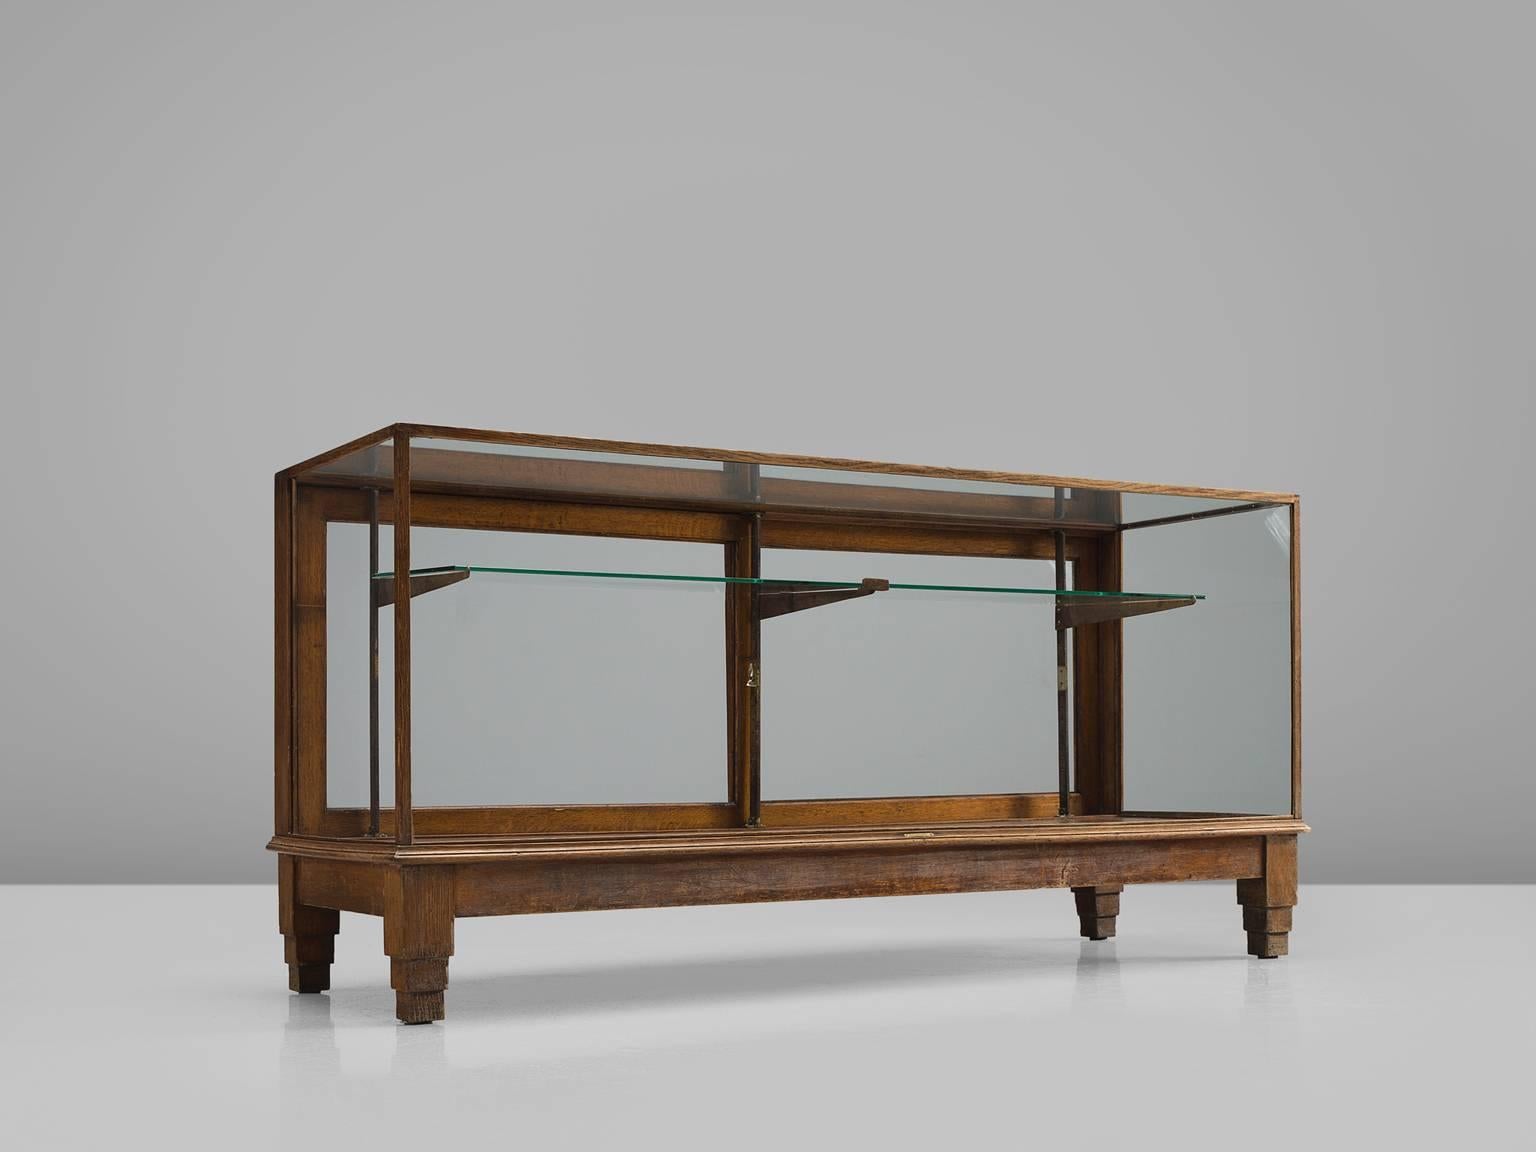 Vitrine, wood, glass, steel, Europe, 1940s.

This sturdy and geometric showcase in glass and wood is part of the midcentury design collection by Morentz. The base of this vitrine features stacked geometric feet and a thin frame around the glass.